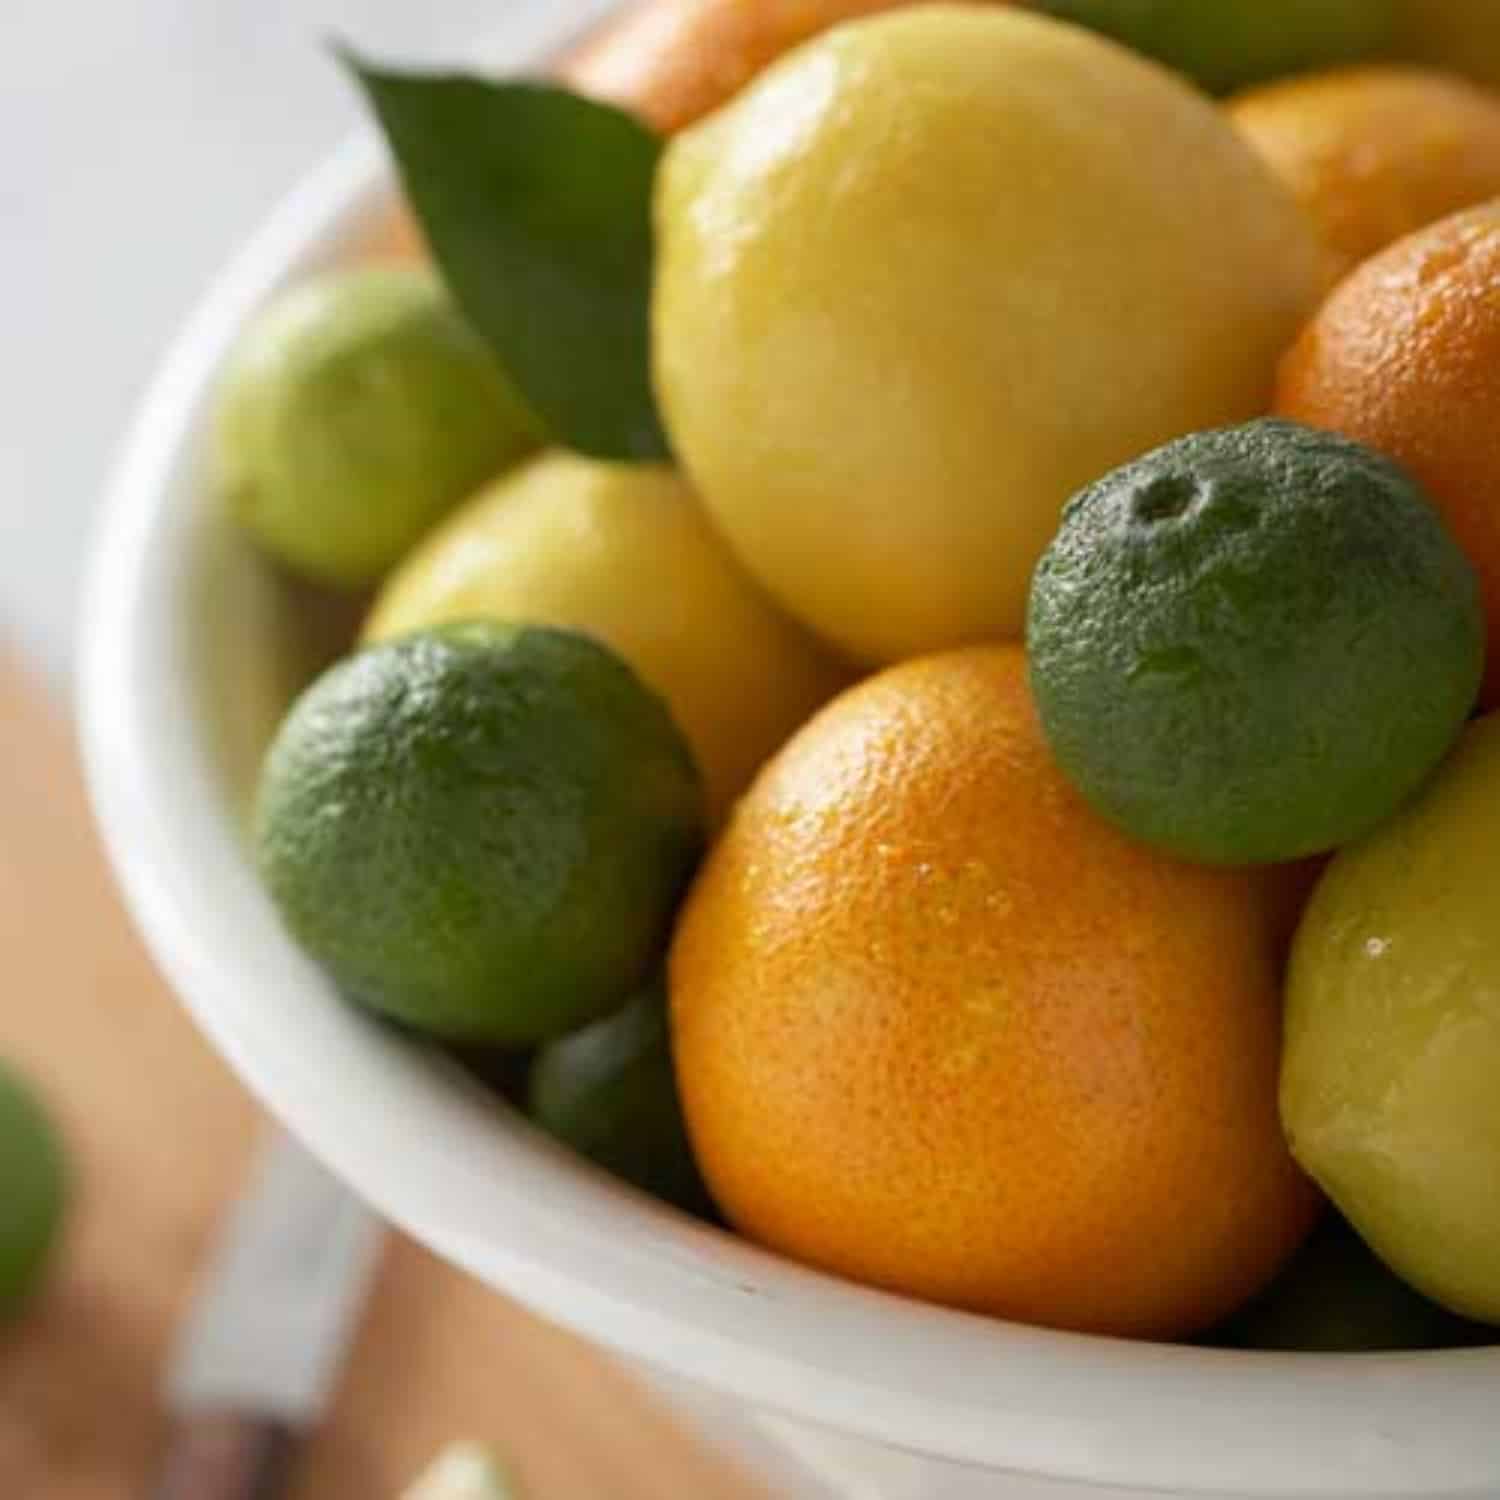 citrus buying guide, types of citrus fruits